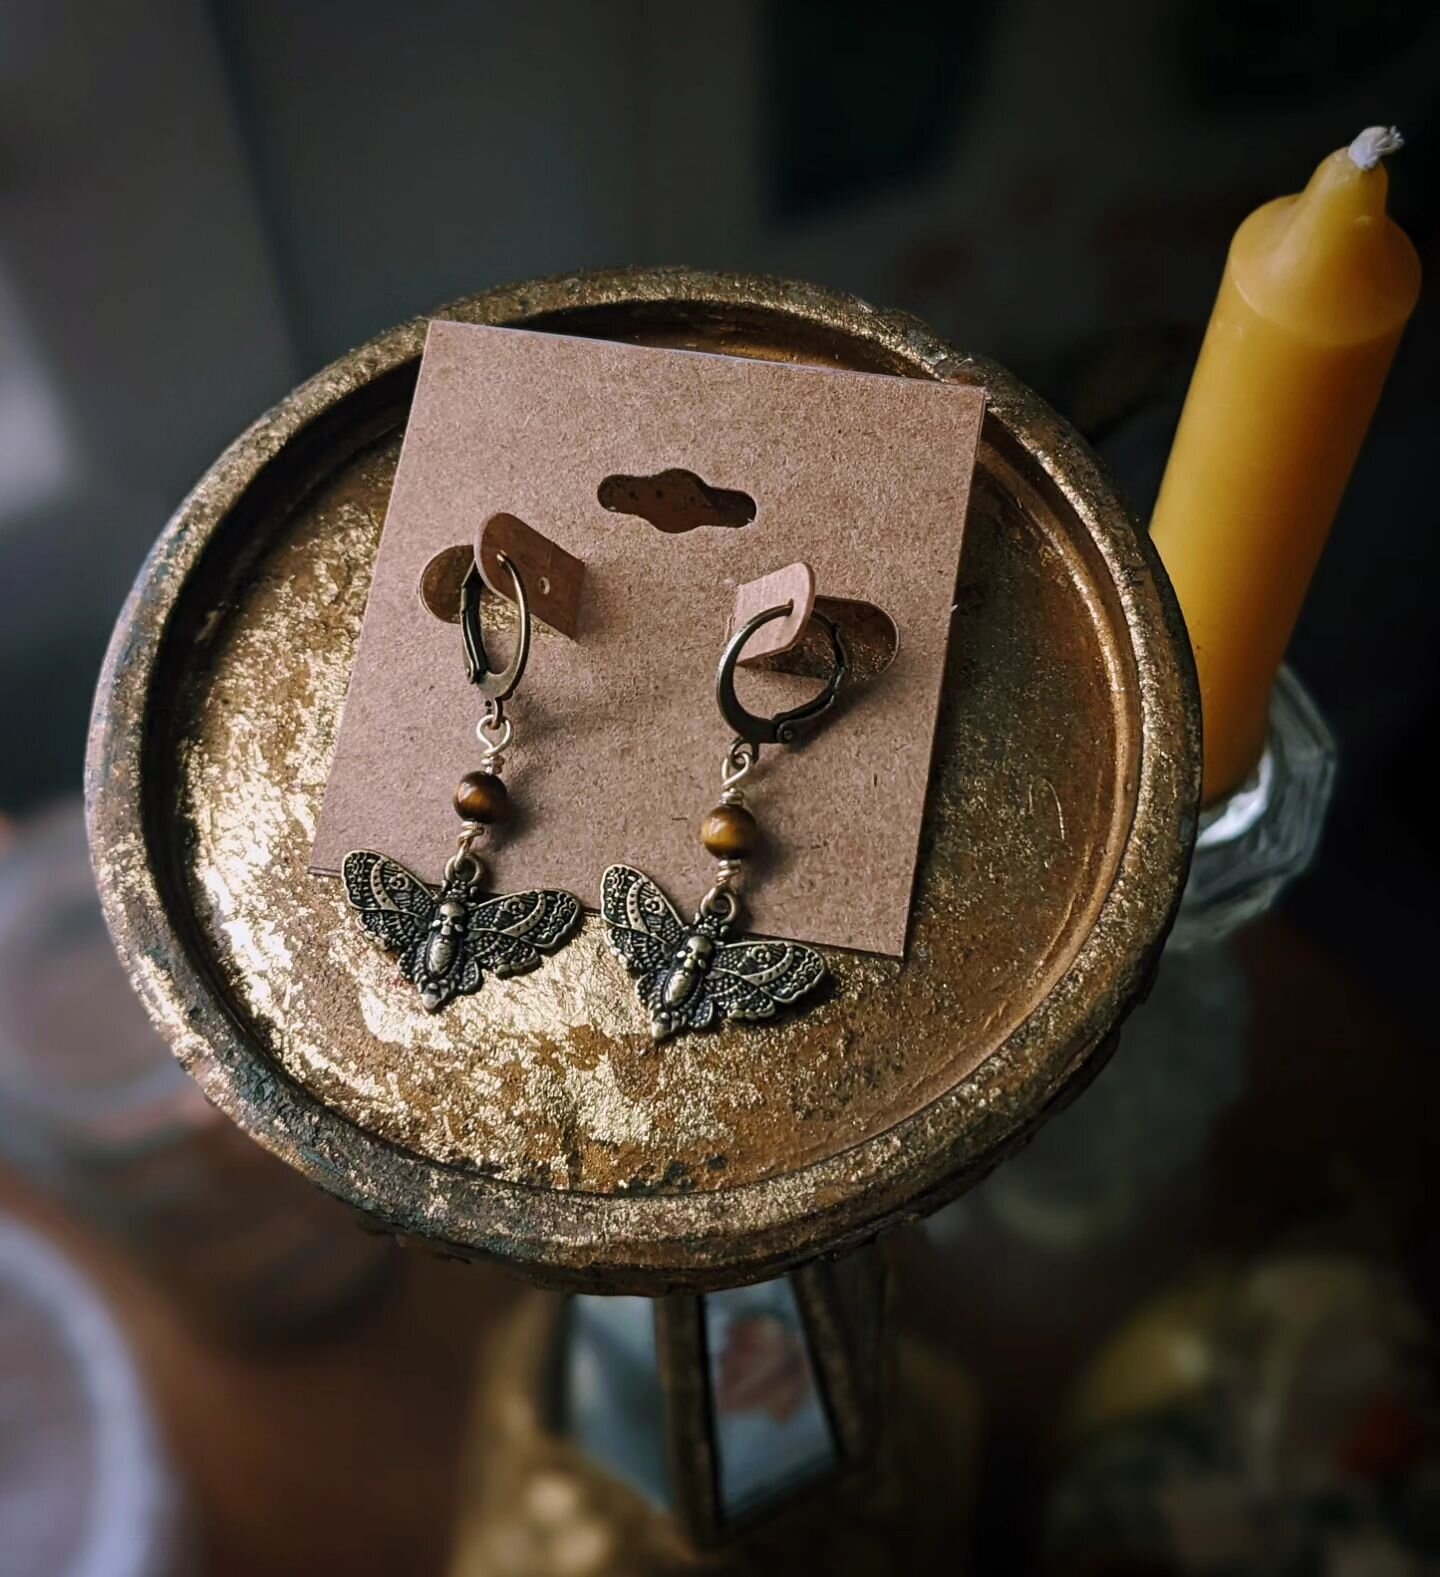 In honor of my 30th birthday TOMORROW, August 4th, I'll be releasing a few macabre-themed jewelry pieces to celebrate the &quot;Death of My 20s&quot;, like these antiqued brass Tiger Eye and Death Head Moth earrings! Tune in tomorrow at Noon EST to p